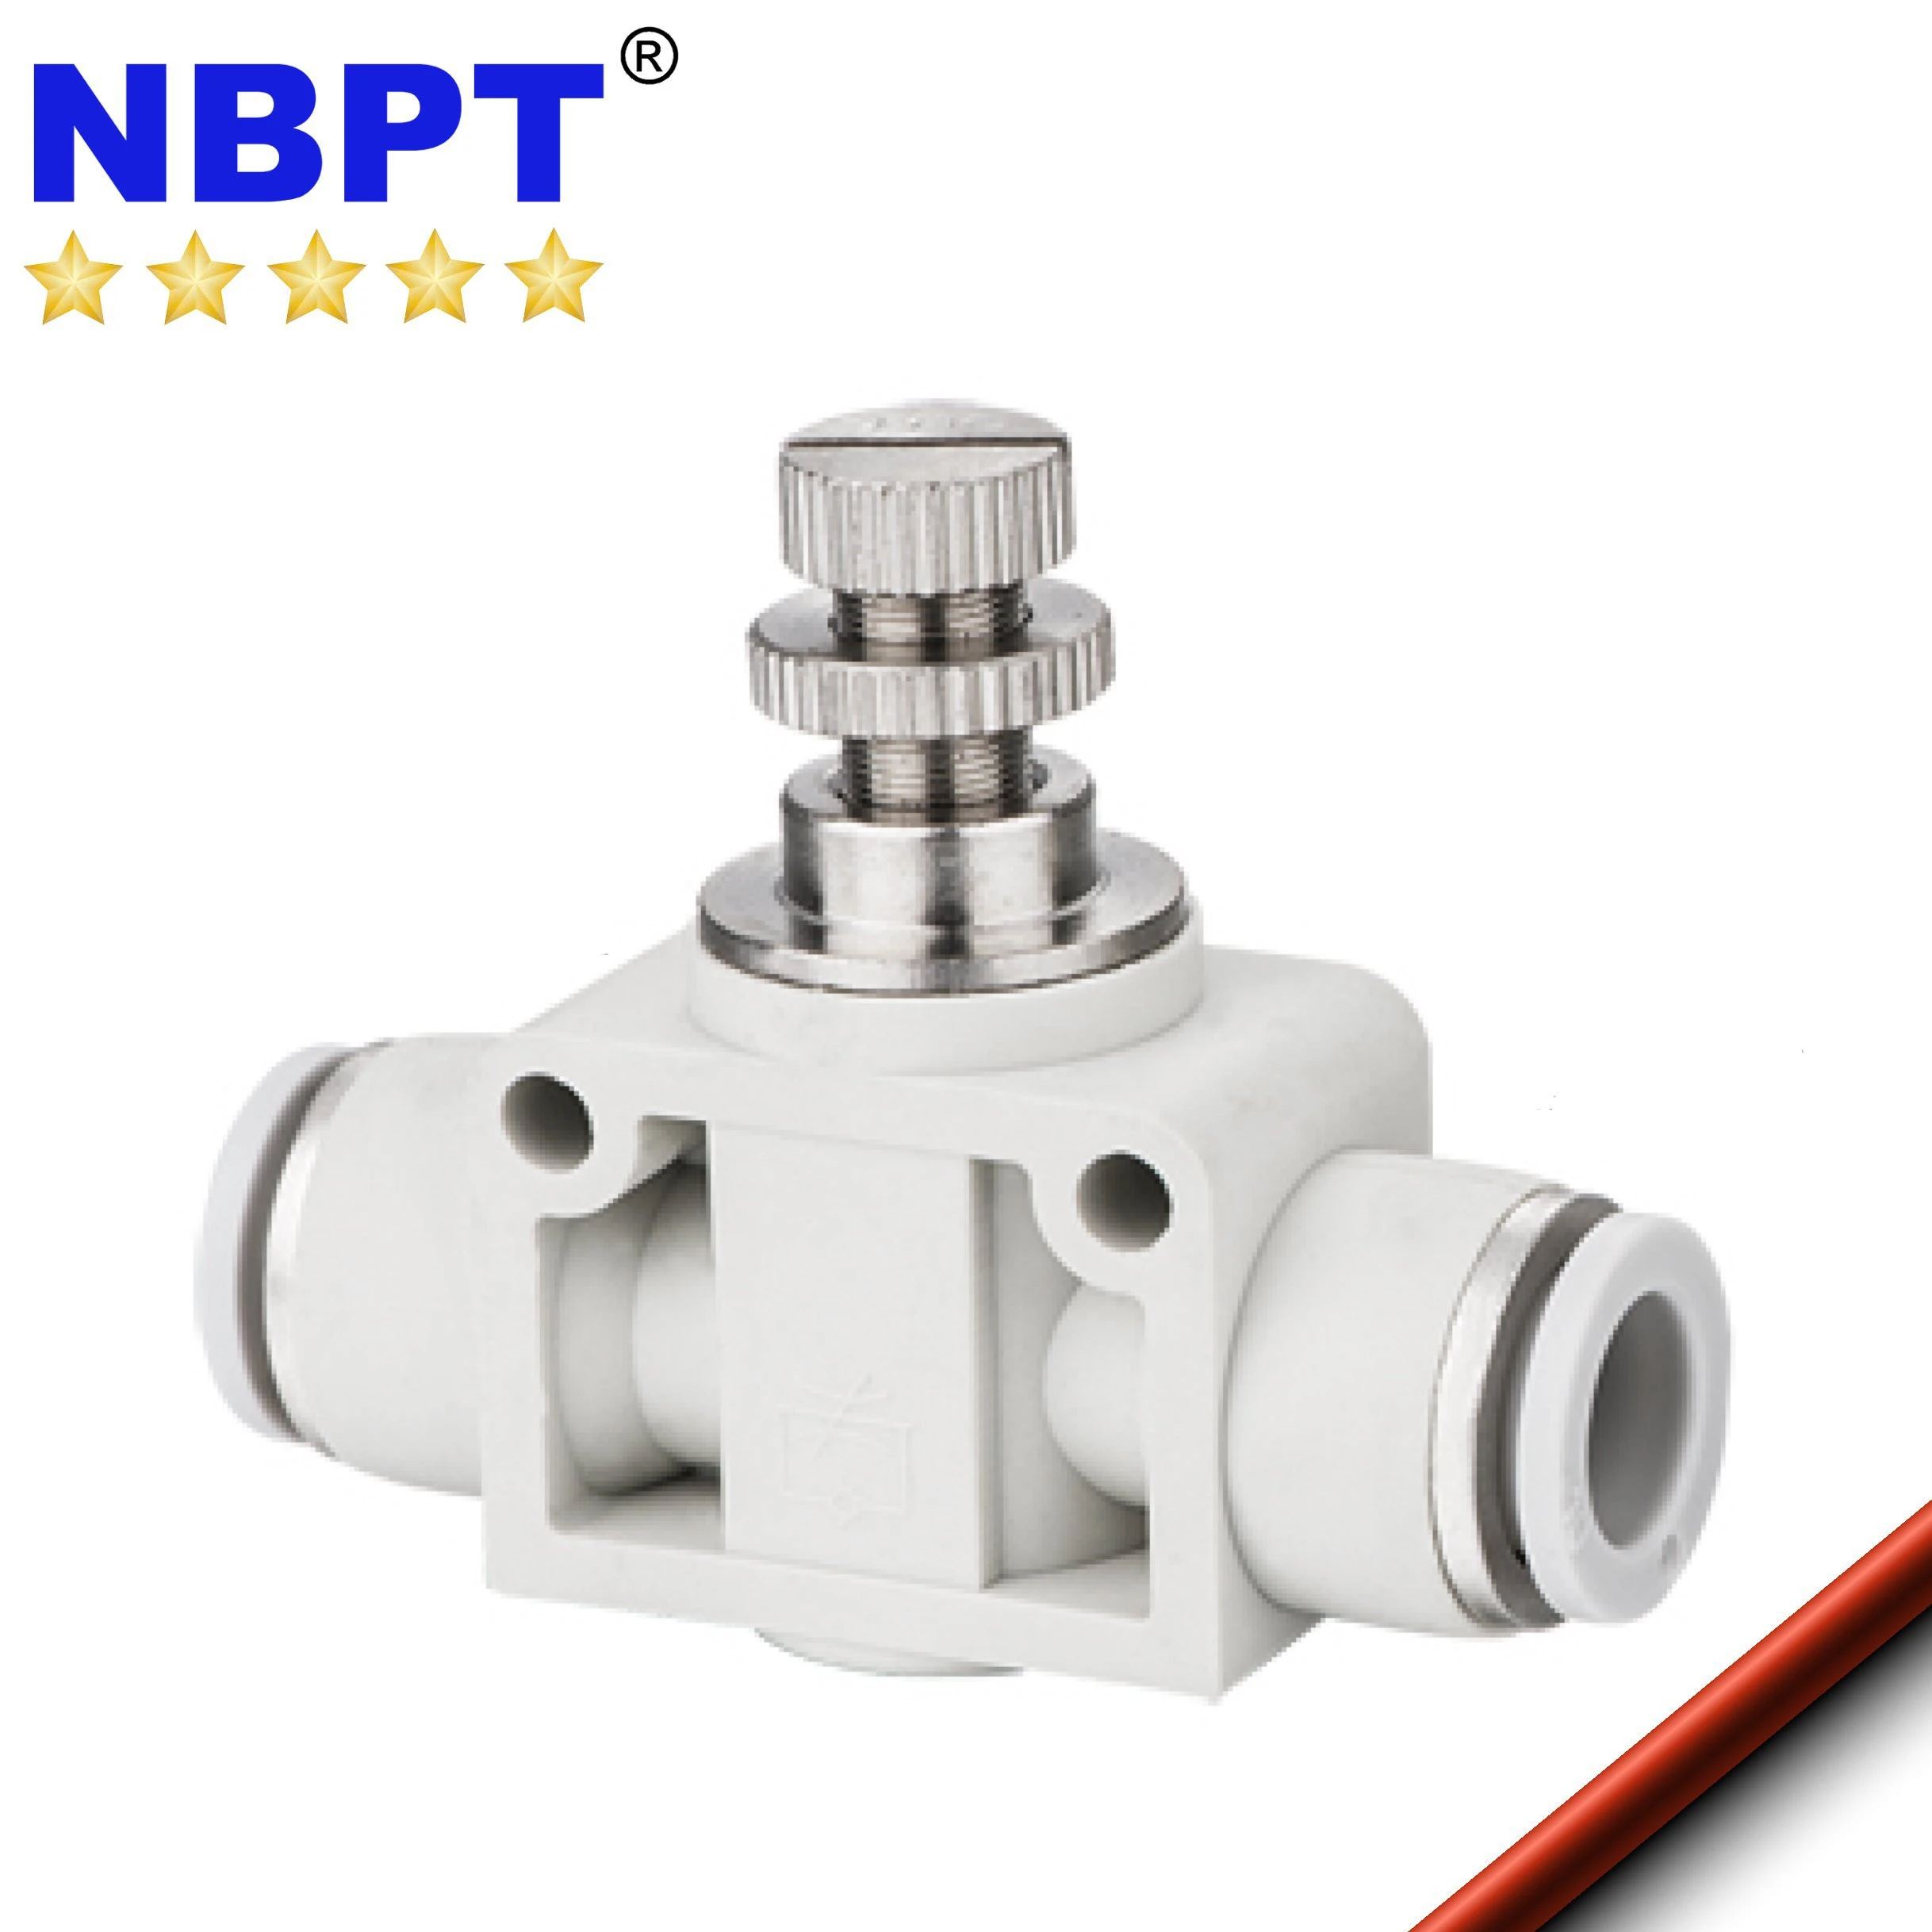 SCF series union pneumatic speed control flow control fittings, pneumatic in line  throttle valve by NBPT